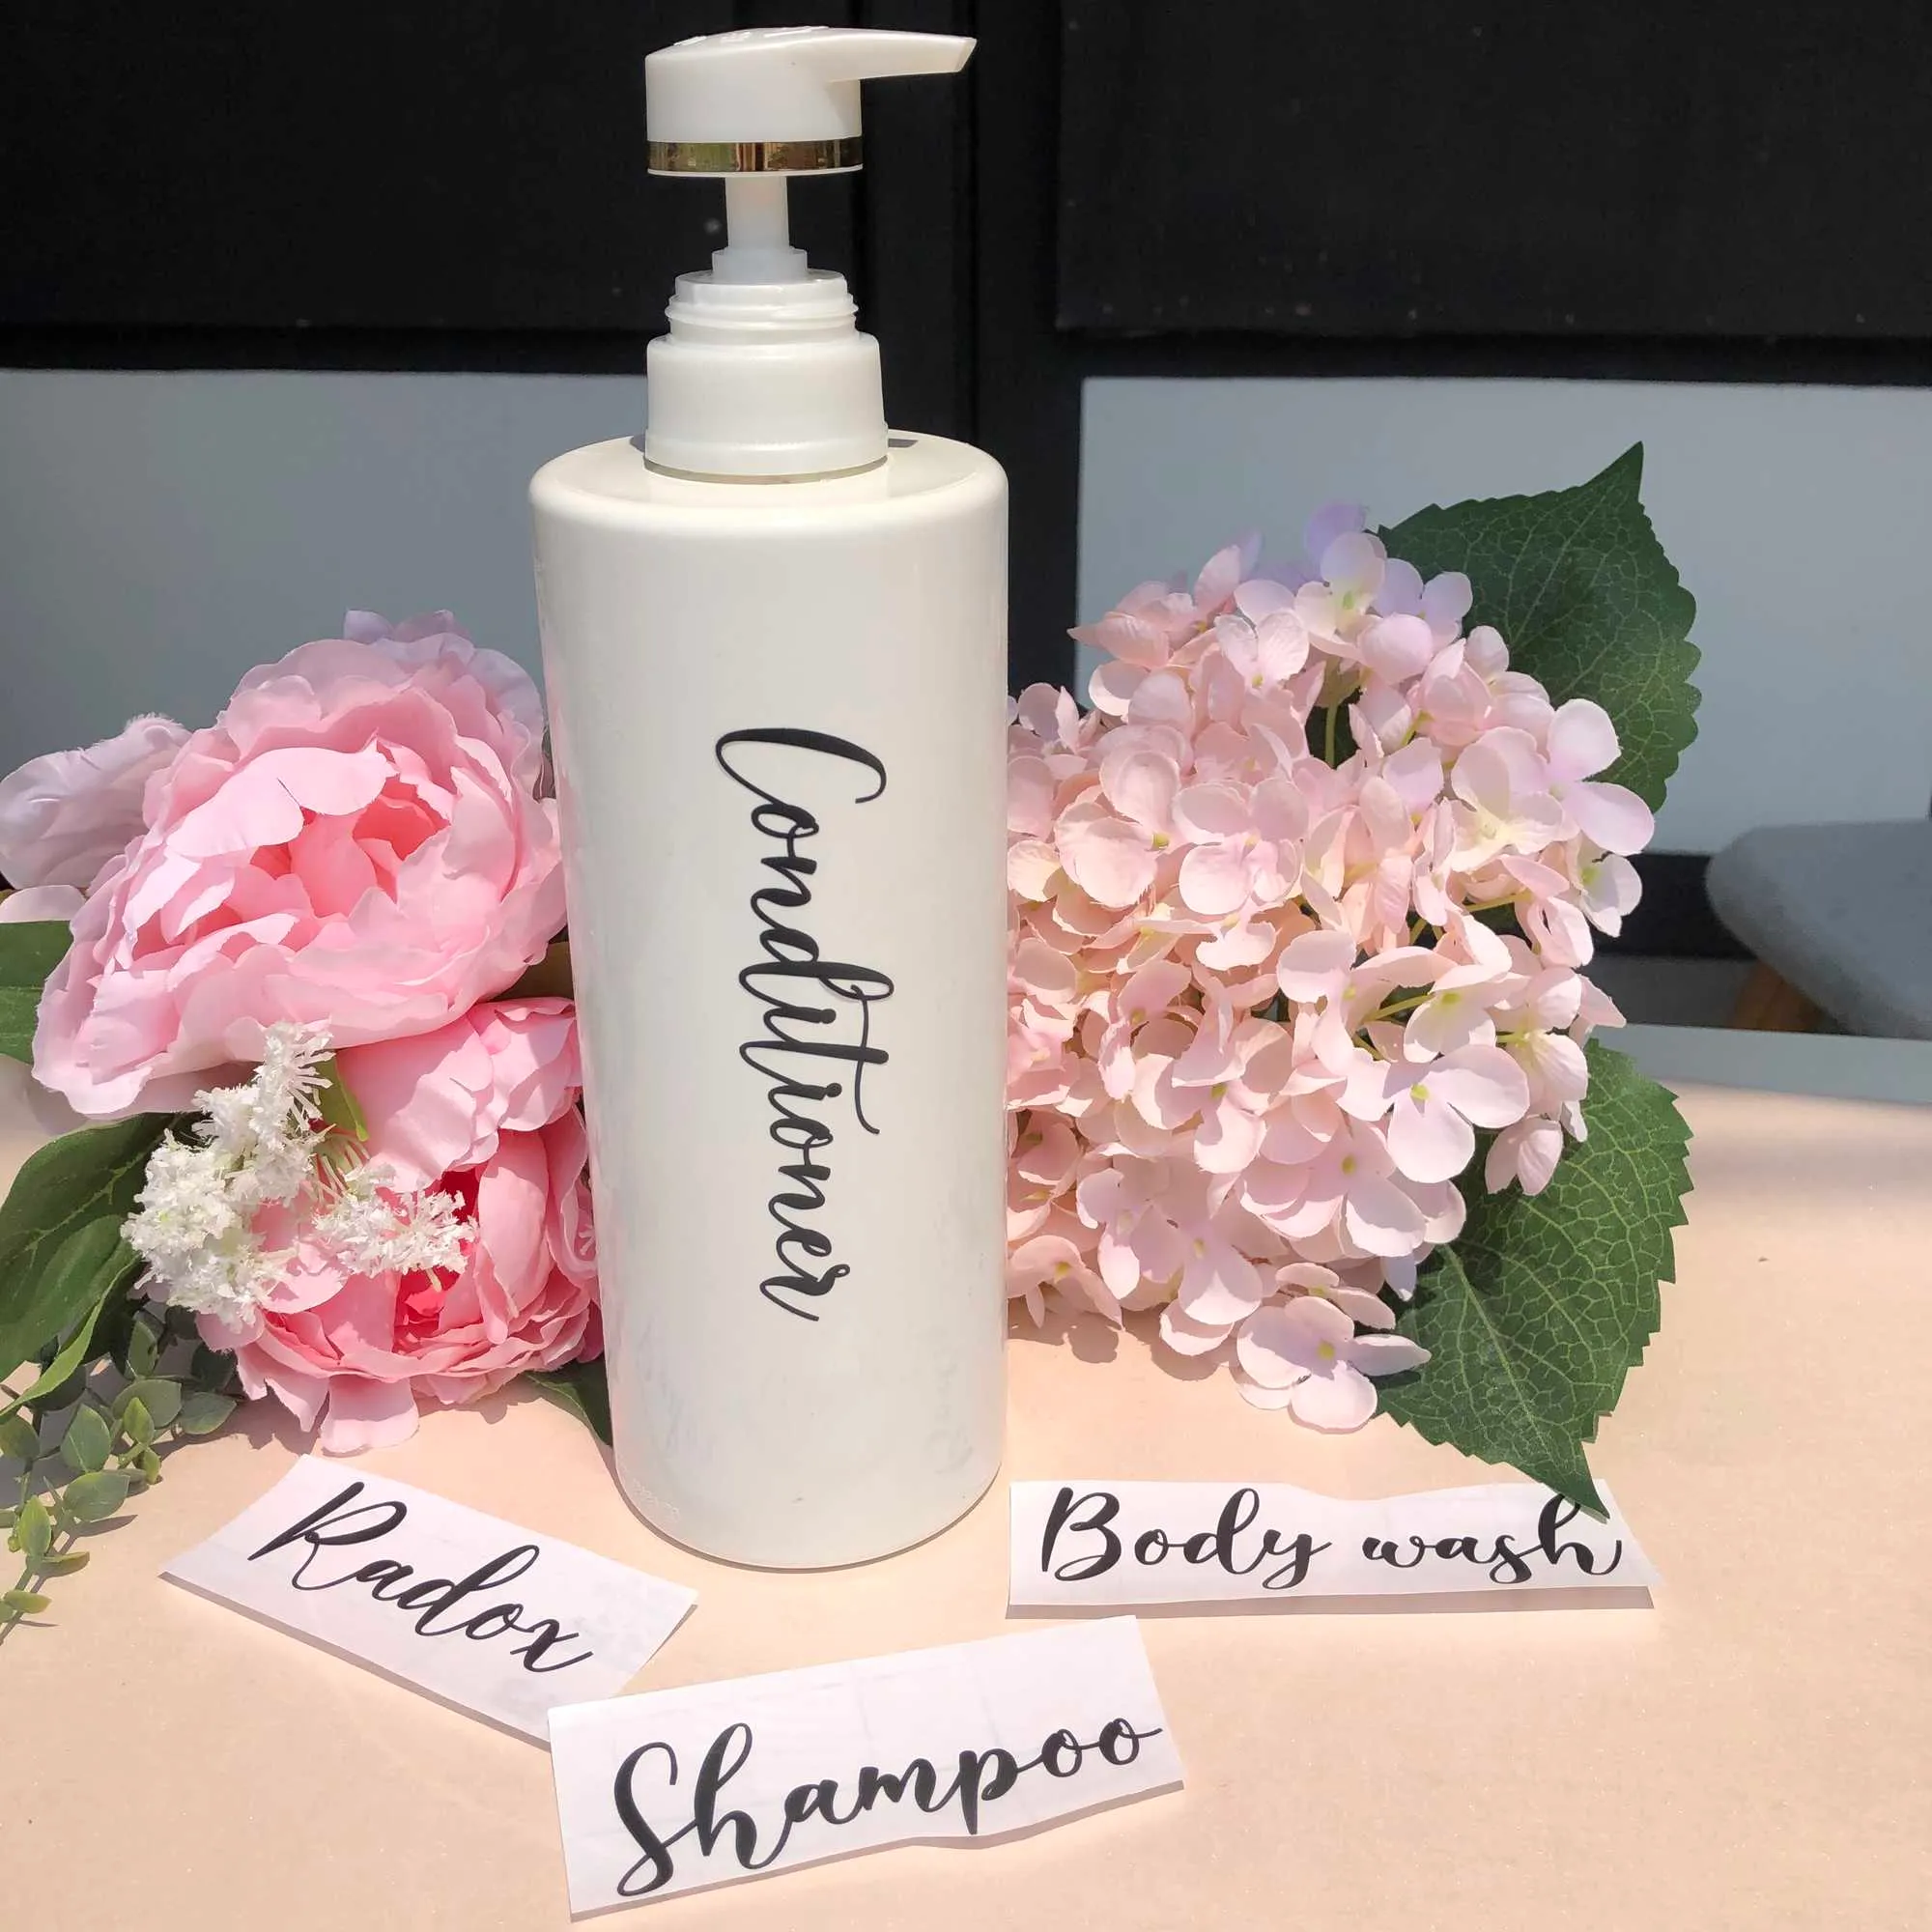 Personalised 500ml Shampoo Bottle Decal bathroom storage Conditioner Body Wash bottle Stickers (Bottle not included)